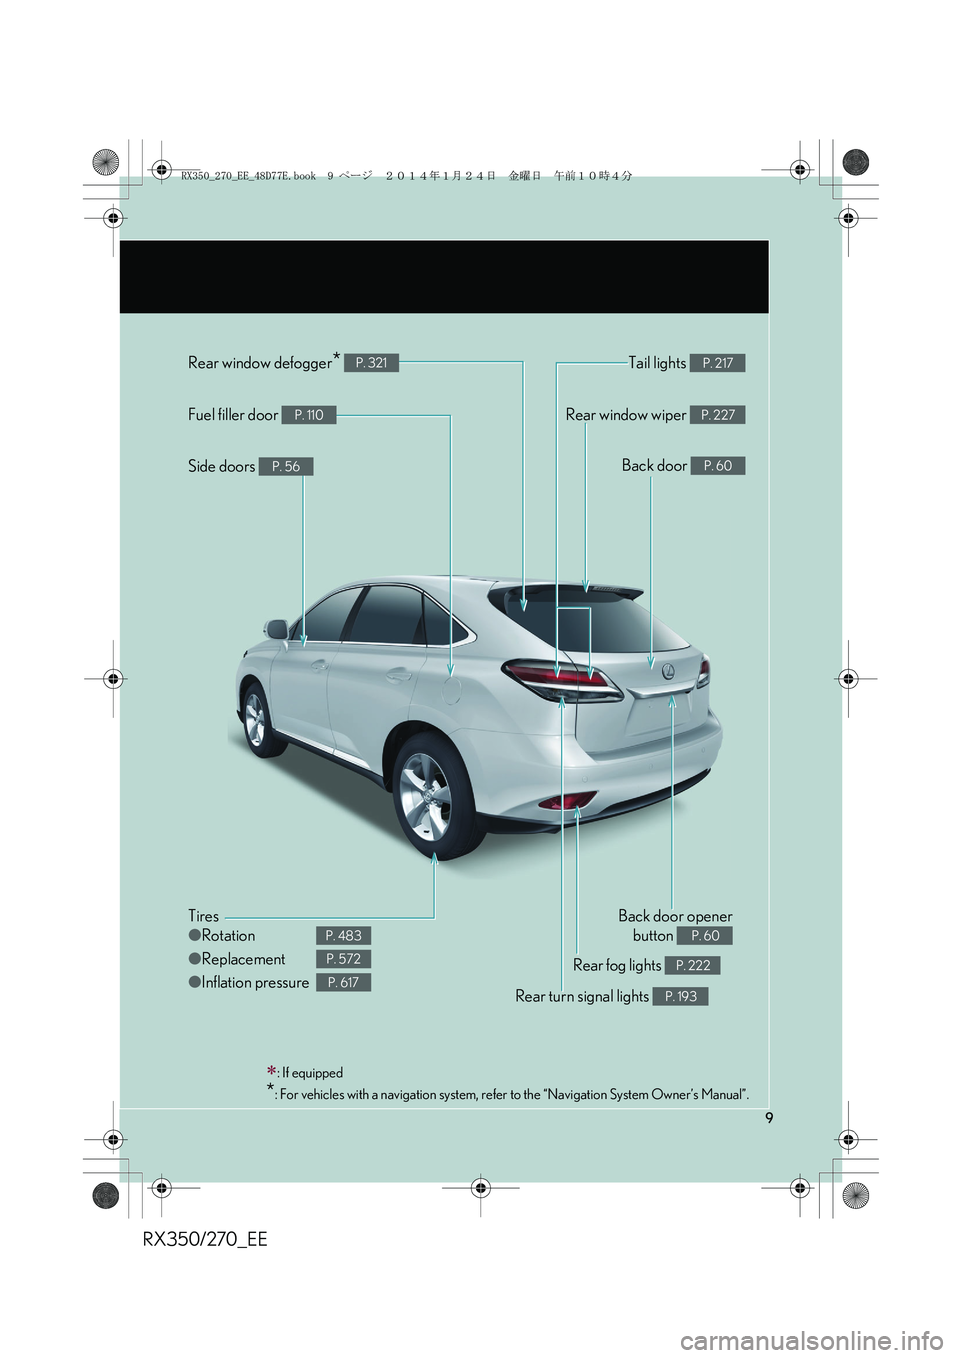 LEXUS RX270 2014  Owners Manual RX350/270_EE
9
∗: If equipped
*: For vehicles with a navigation system, refer to the “Navigation System Owner’s Manual”.
Tires
●Rotation
●Replacement
●Inflation pressure
P. 483
P. 572
P.